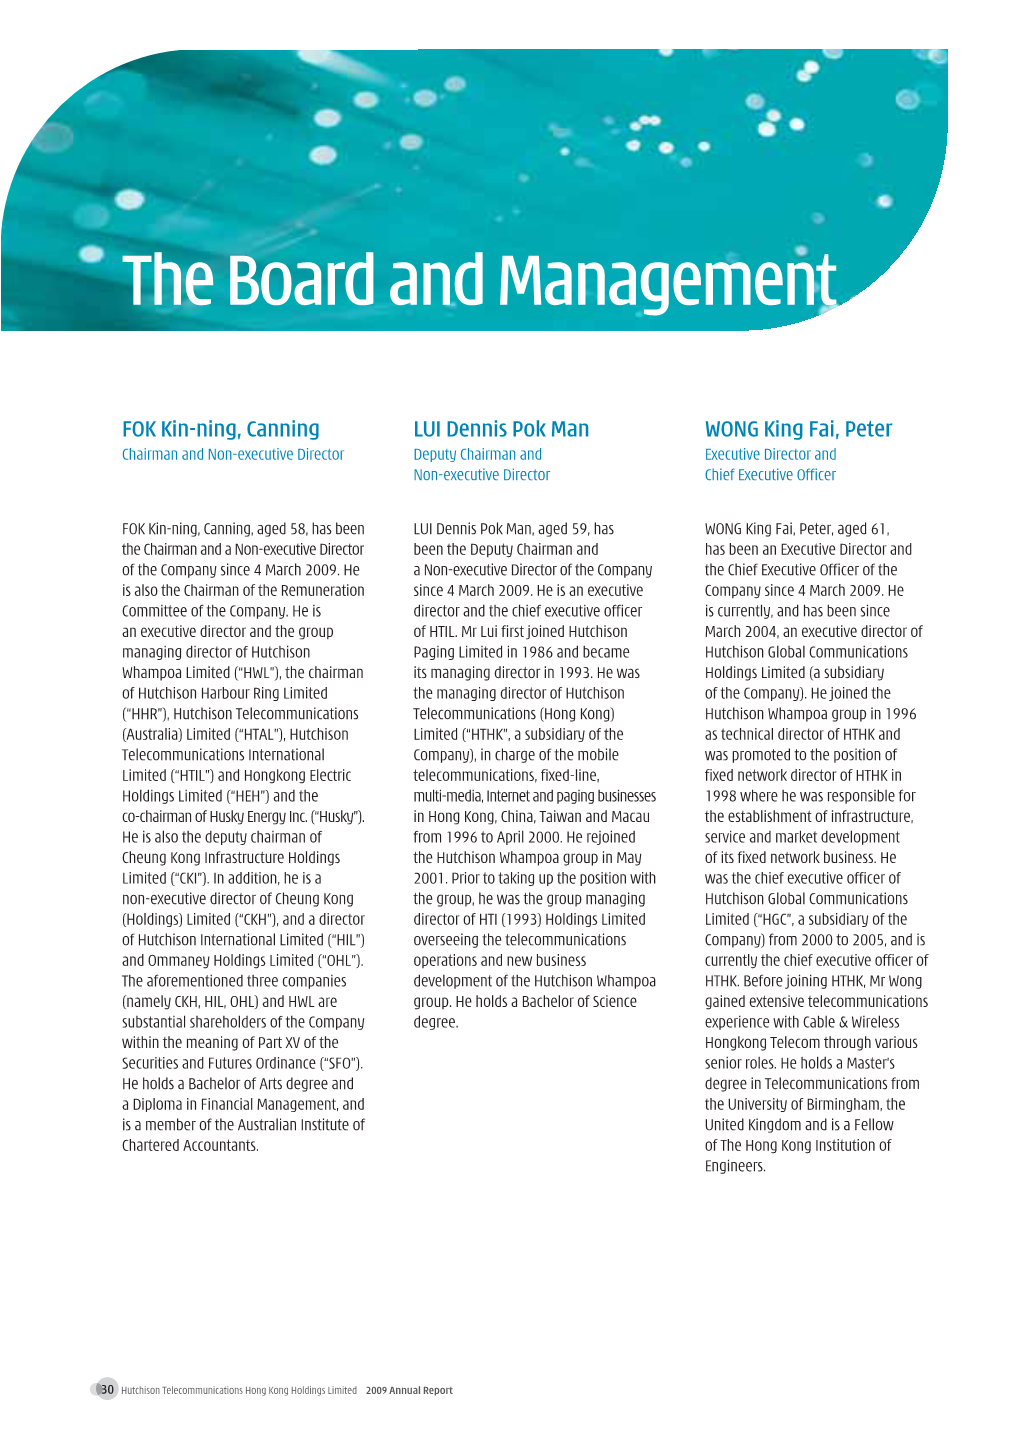 The Board and Management